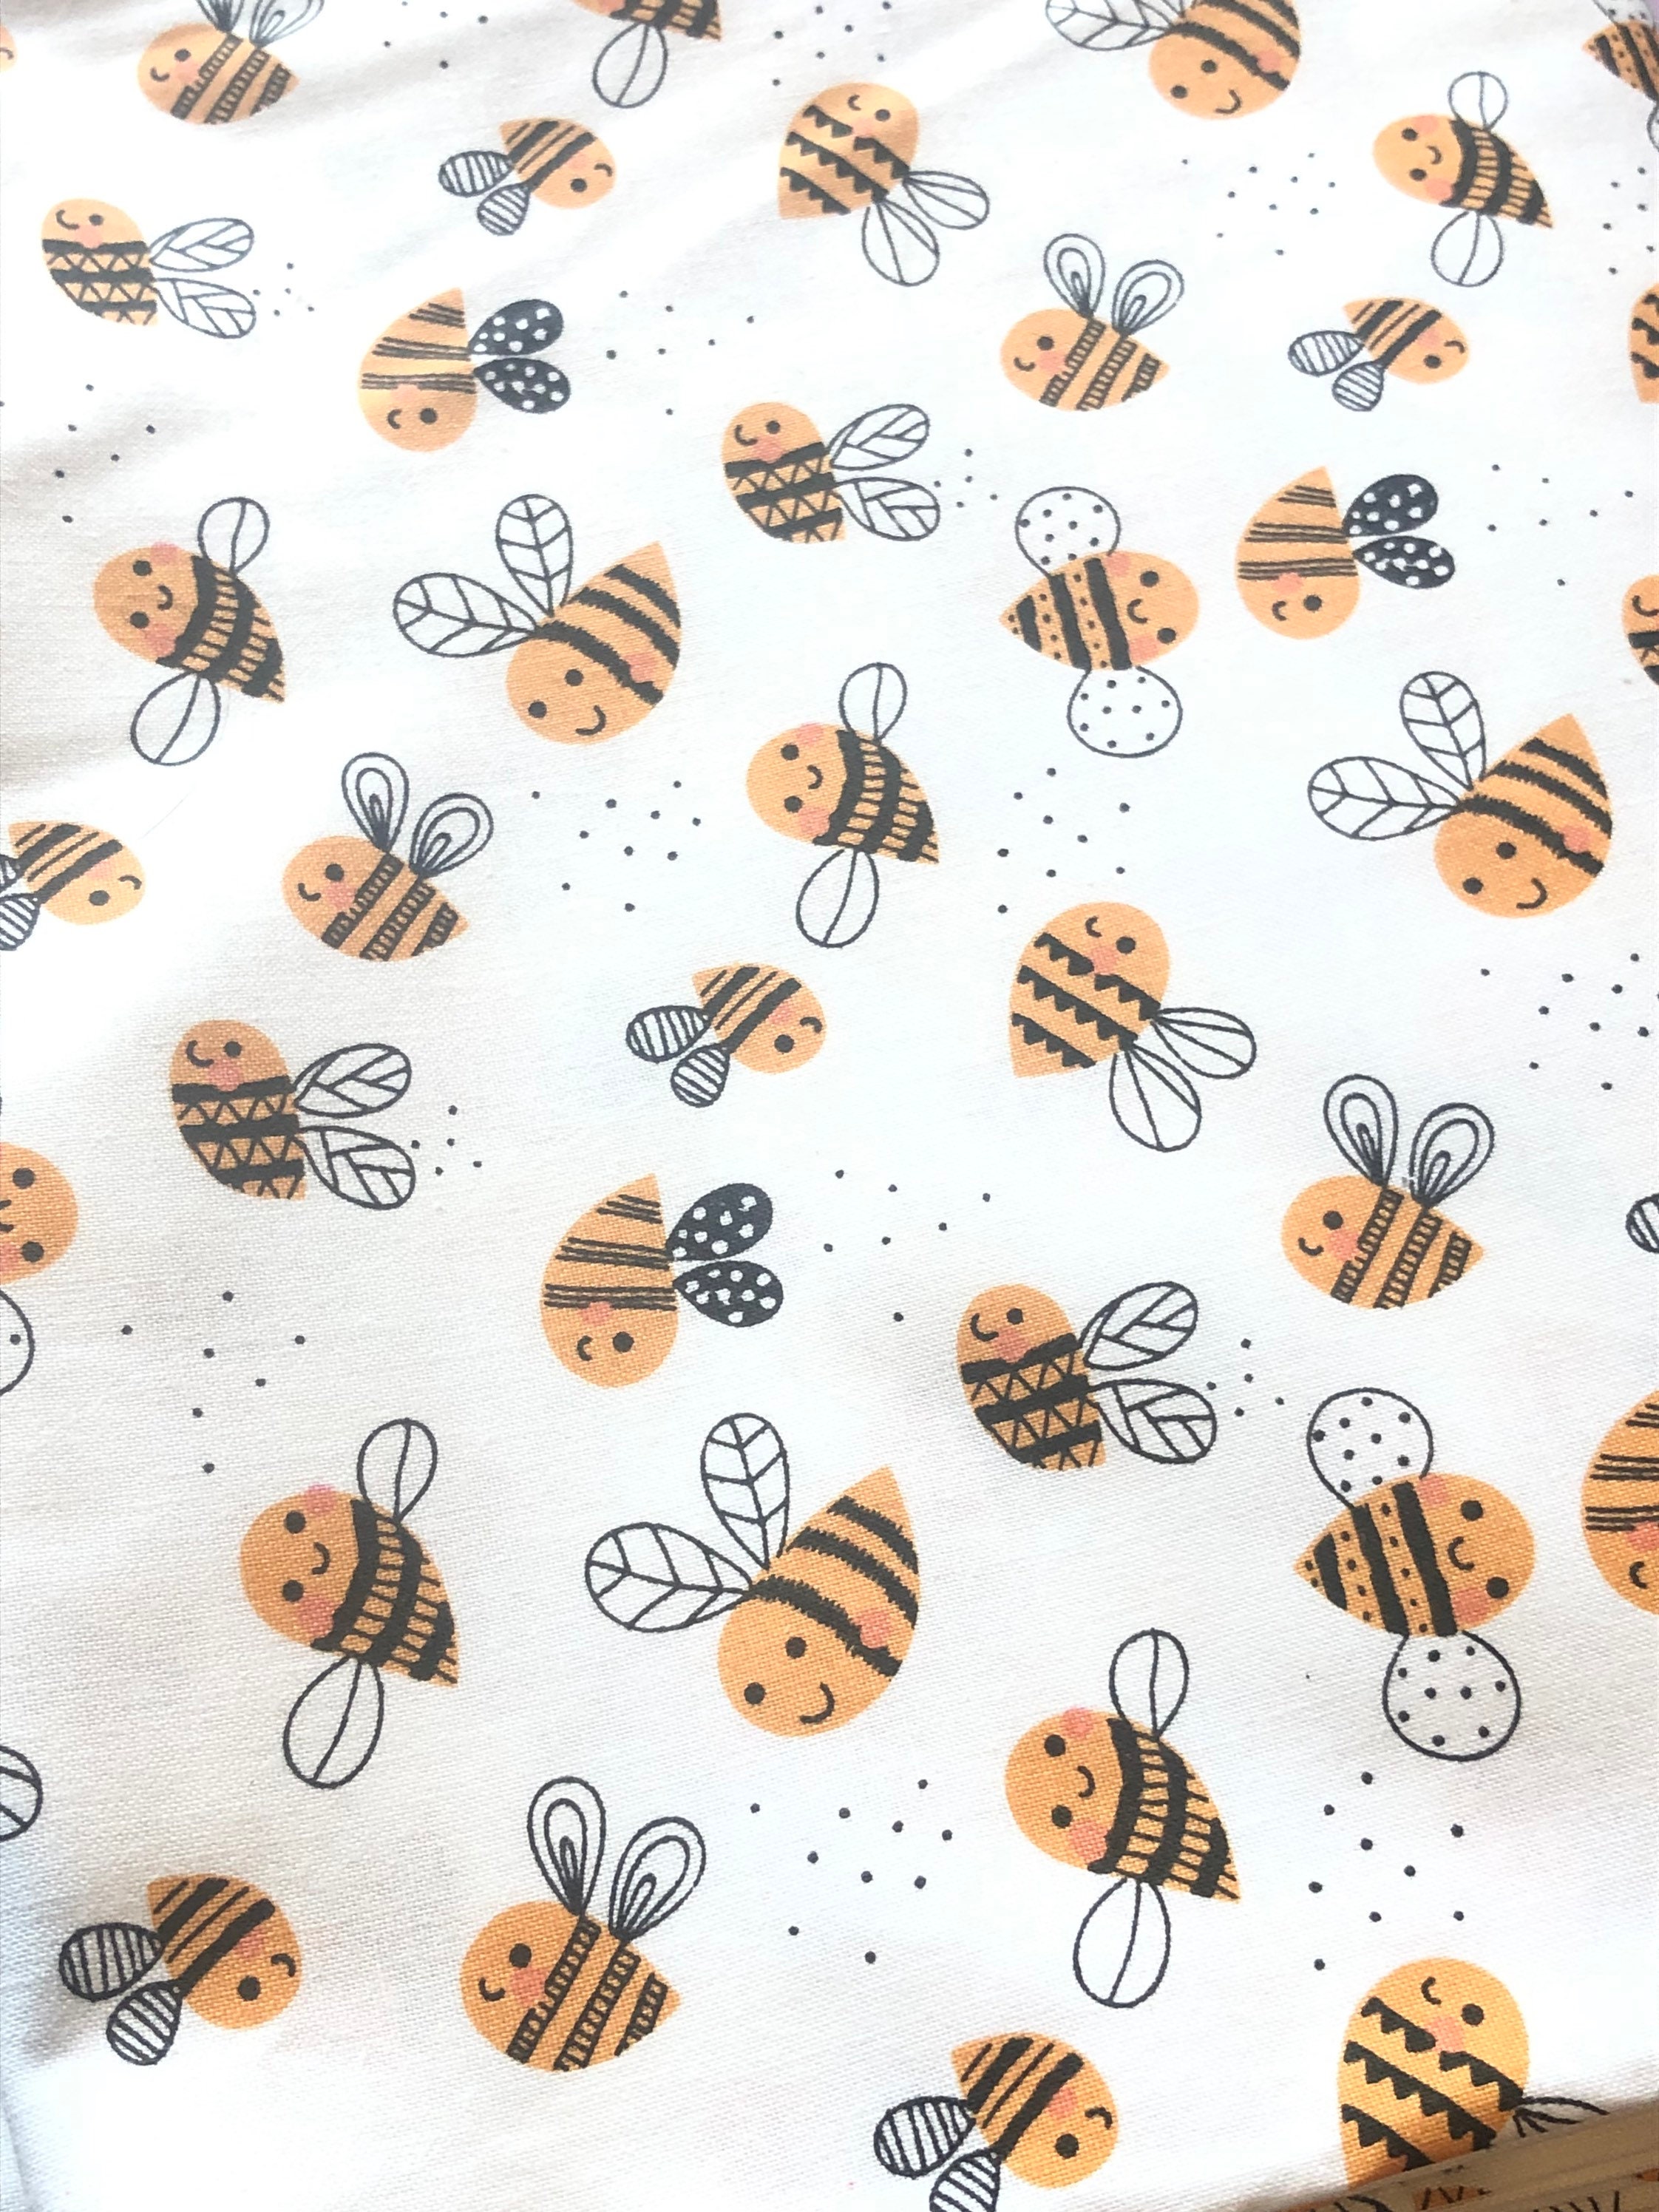 Bees and Honeycomb Fabric 100% Cotton, Honey Bee Fabric, Bumble Bee Cotton  Fabric by the Yard and Half Yard, Quilting Fabric Home Decor -  Denmark